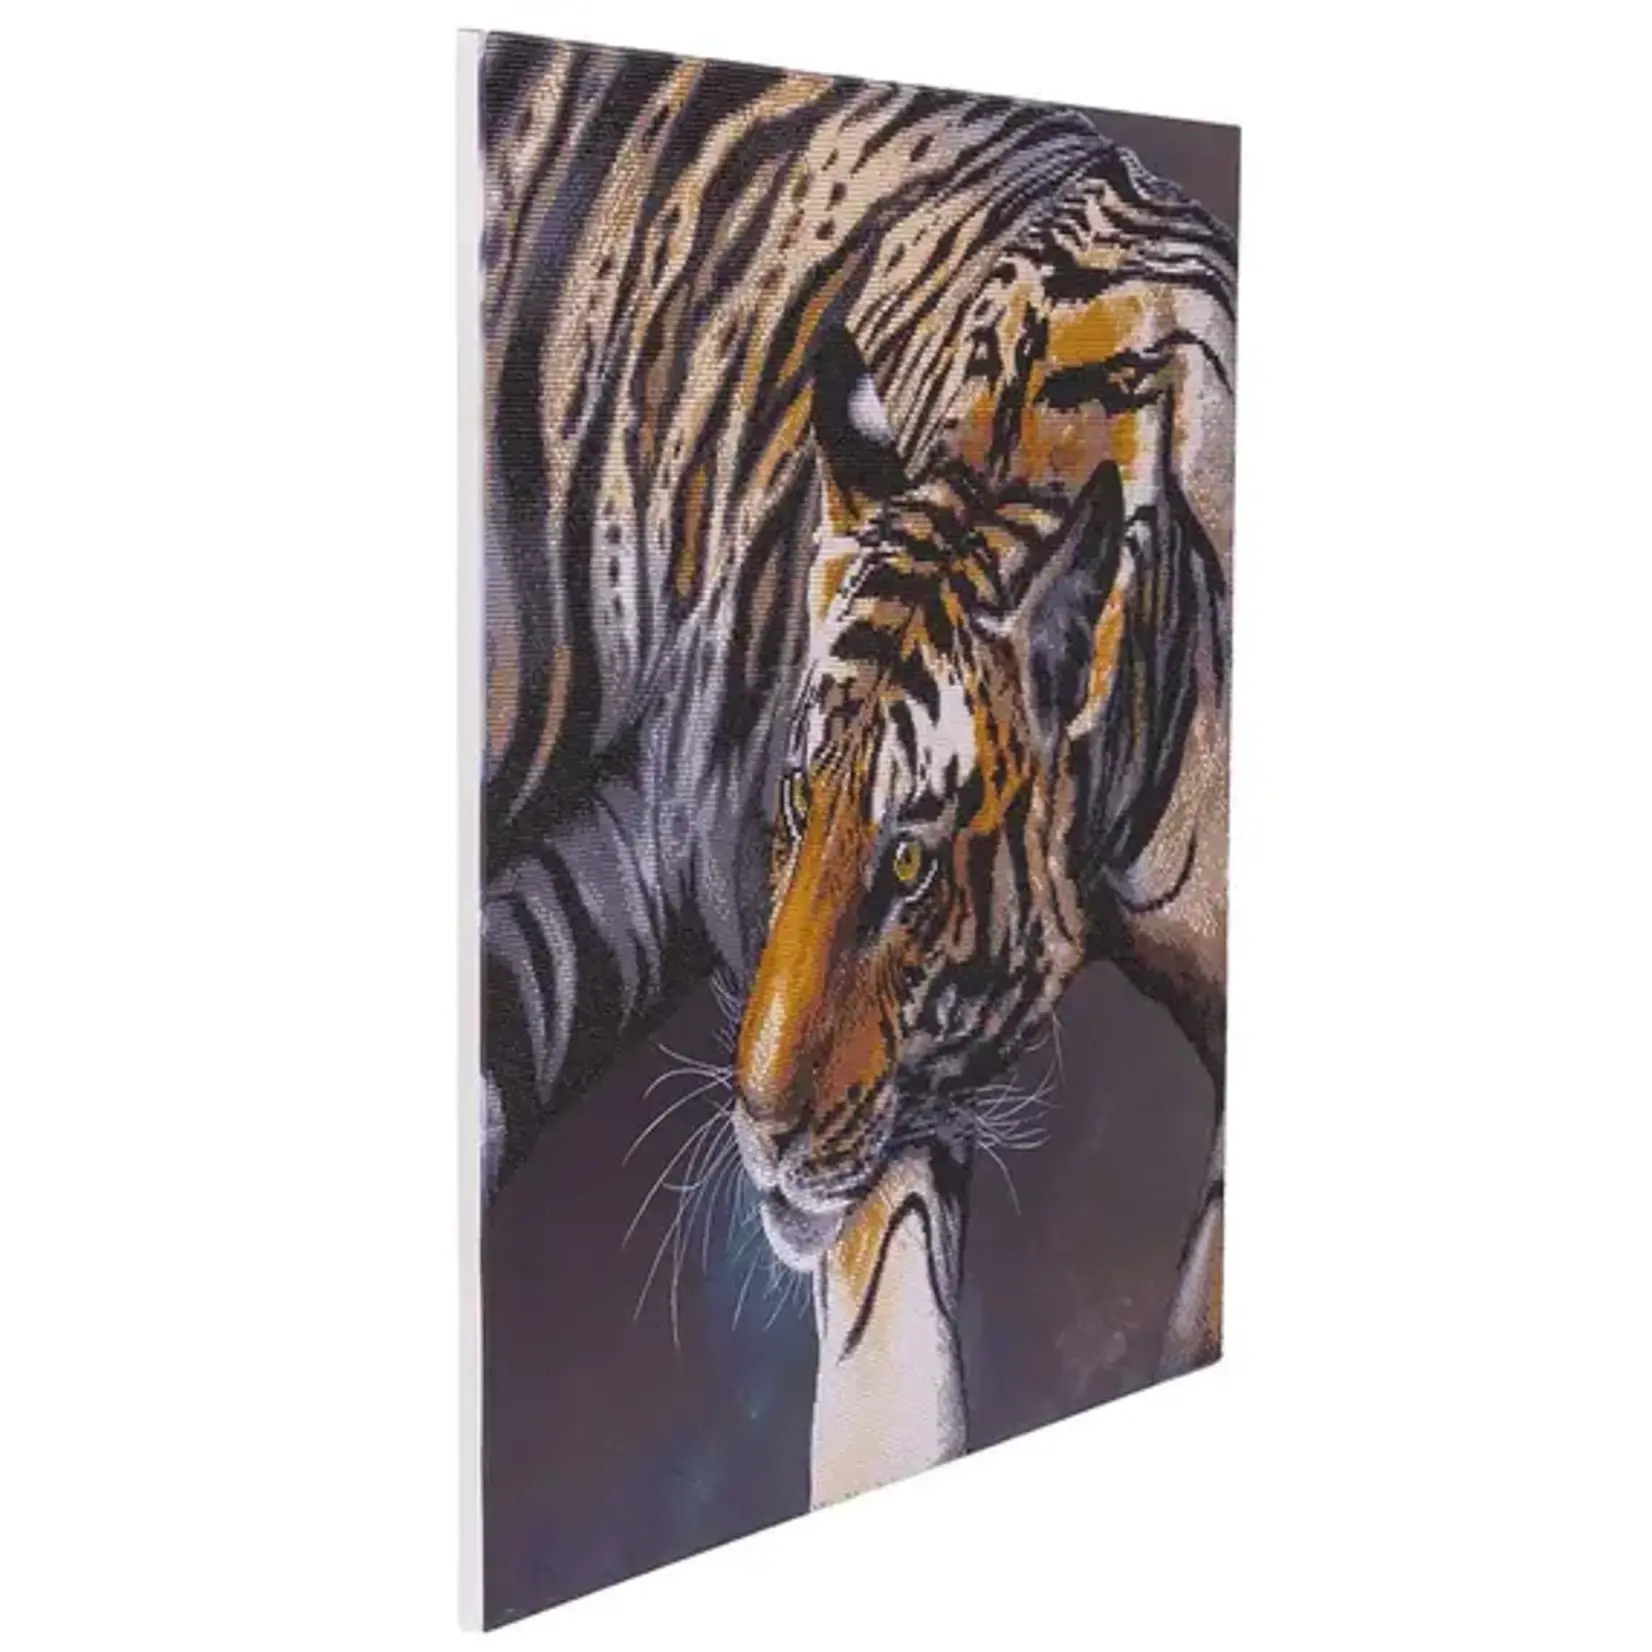 Cobble Hill: Crystal Art Kit Extra Large - The Tiger - Phoenix Fire Games